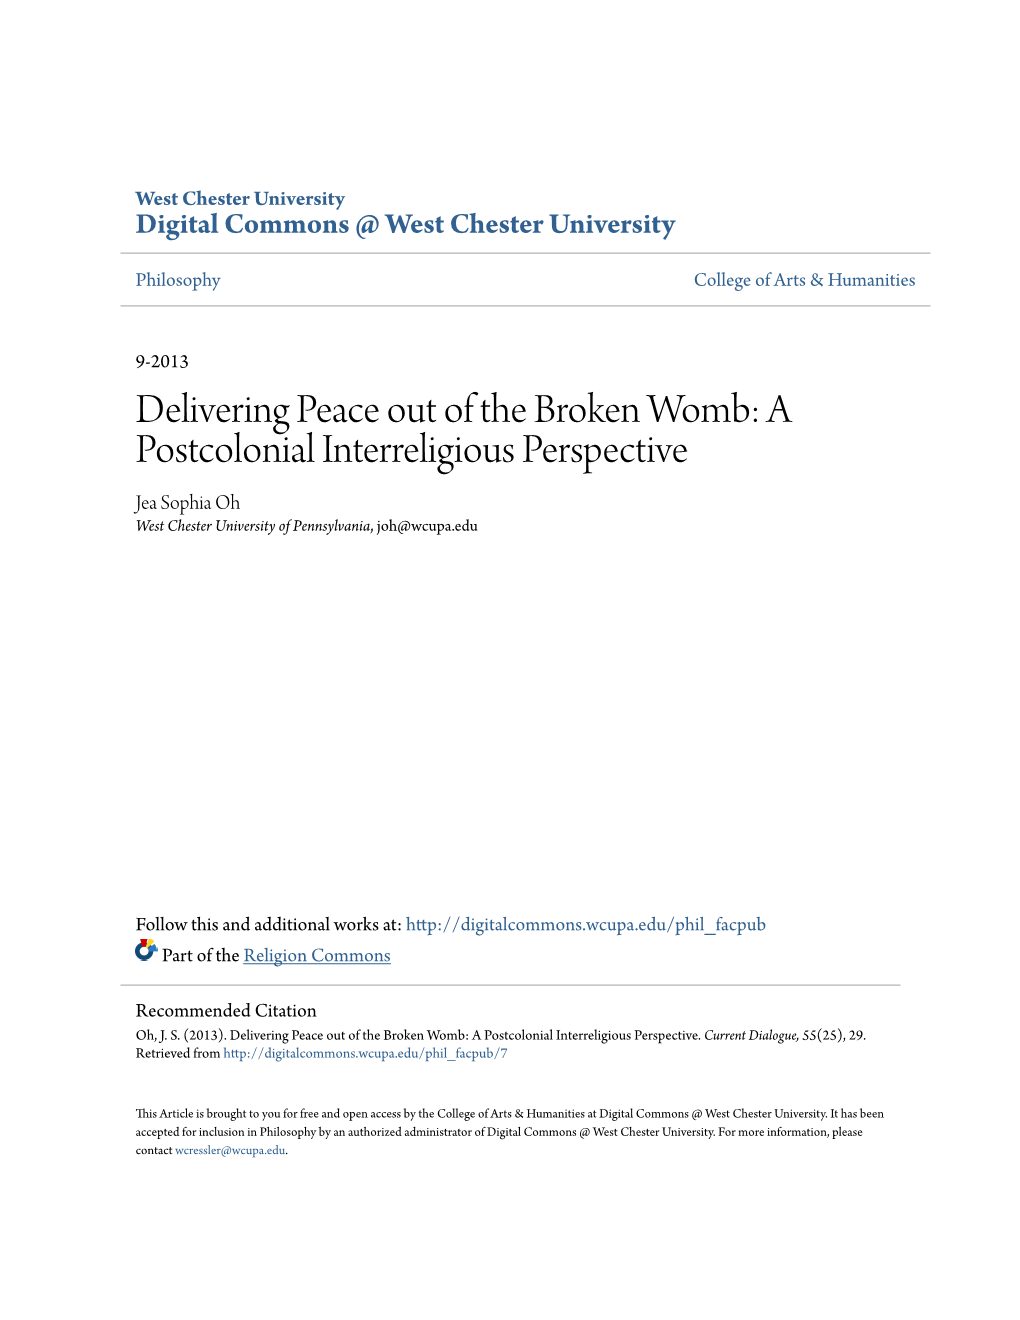 Delivering Peace out of the Broken Womb: a Postcolonial Interreligious Perspective Jea Sophia Oh West Chester University of Pennsylvania, Joh@Wcupa.Edu